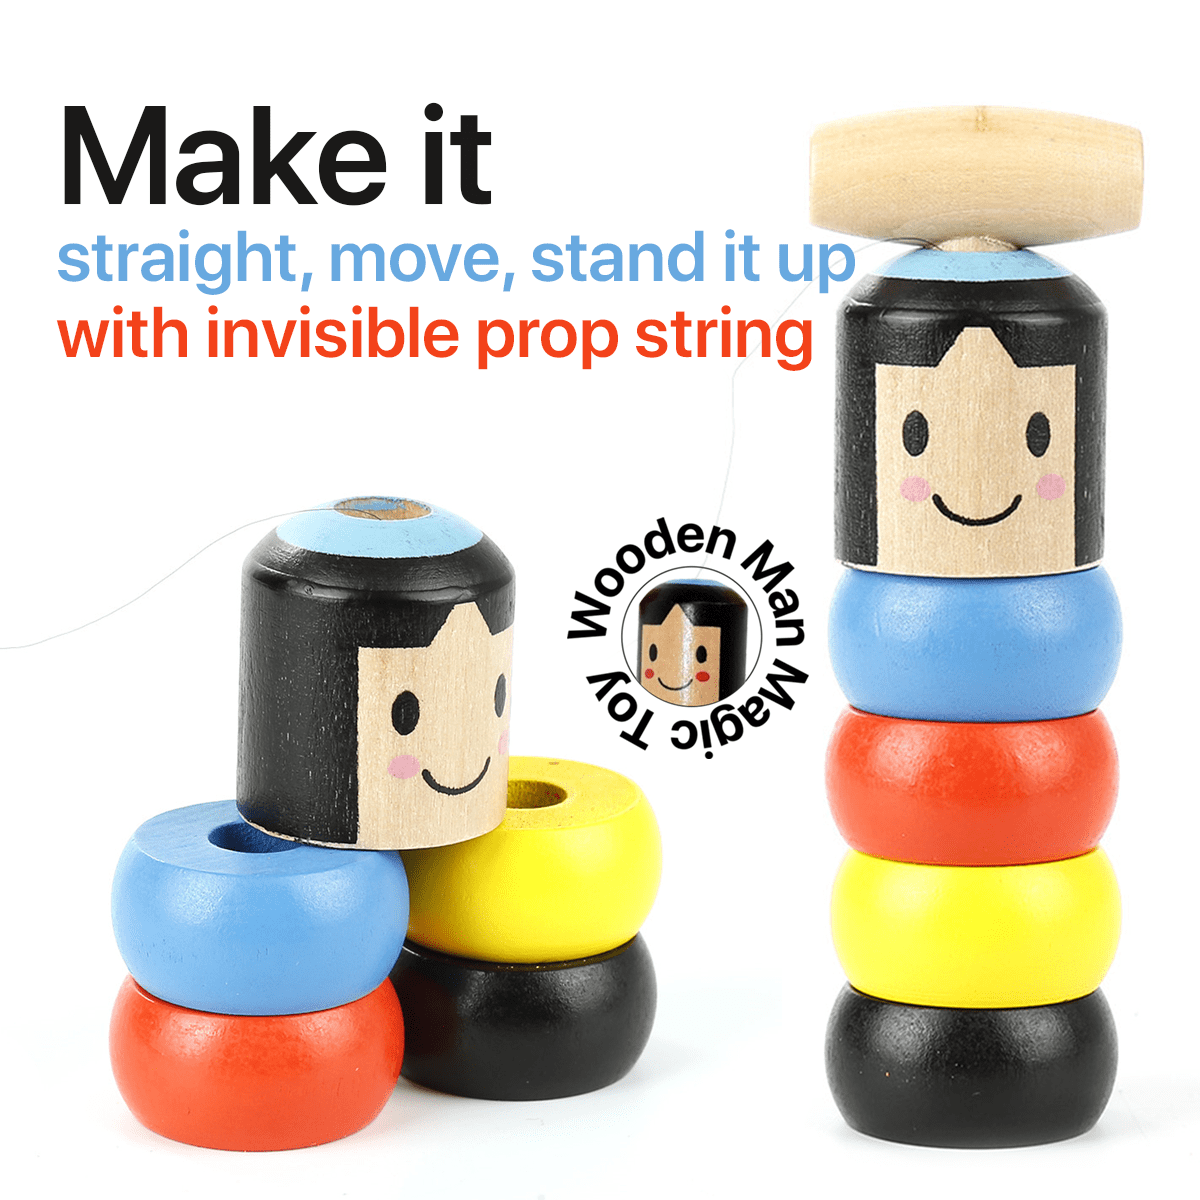 Unbreakable Wooden Man Magic Toy Toys For Children SELL HOT Gifts Bes I9K9